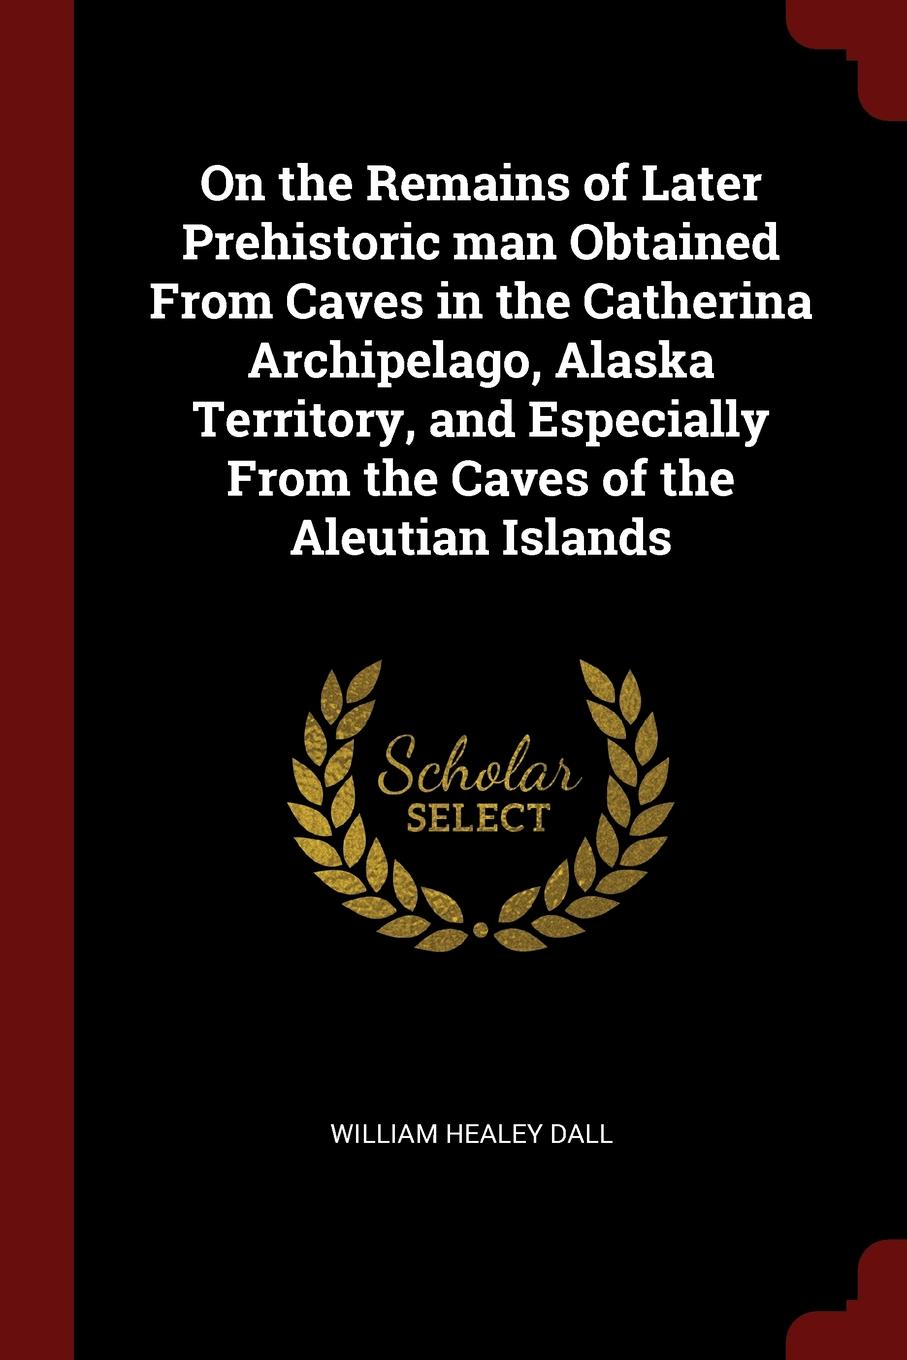 фото On the Remains of Later Prehistoric man Obtained From Caves in the Catherina Archipelago, Alaska Territory, and Especially From the Caves of the Aleutian Islands